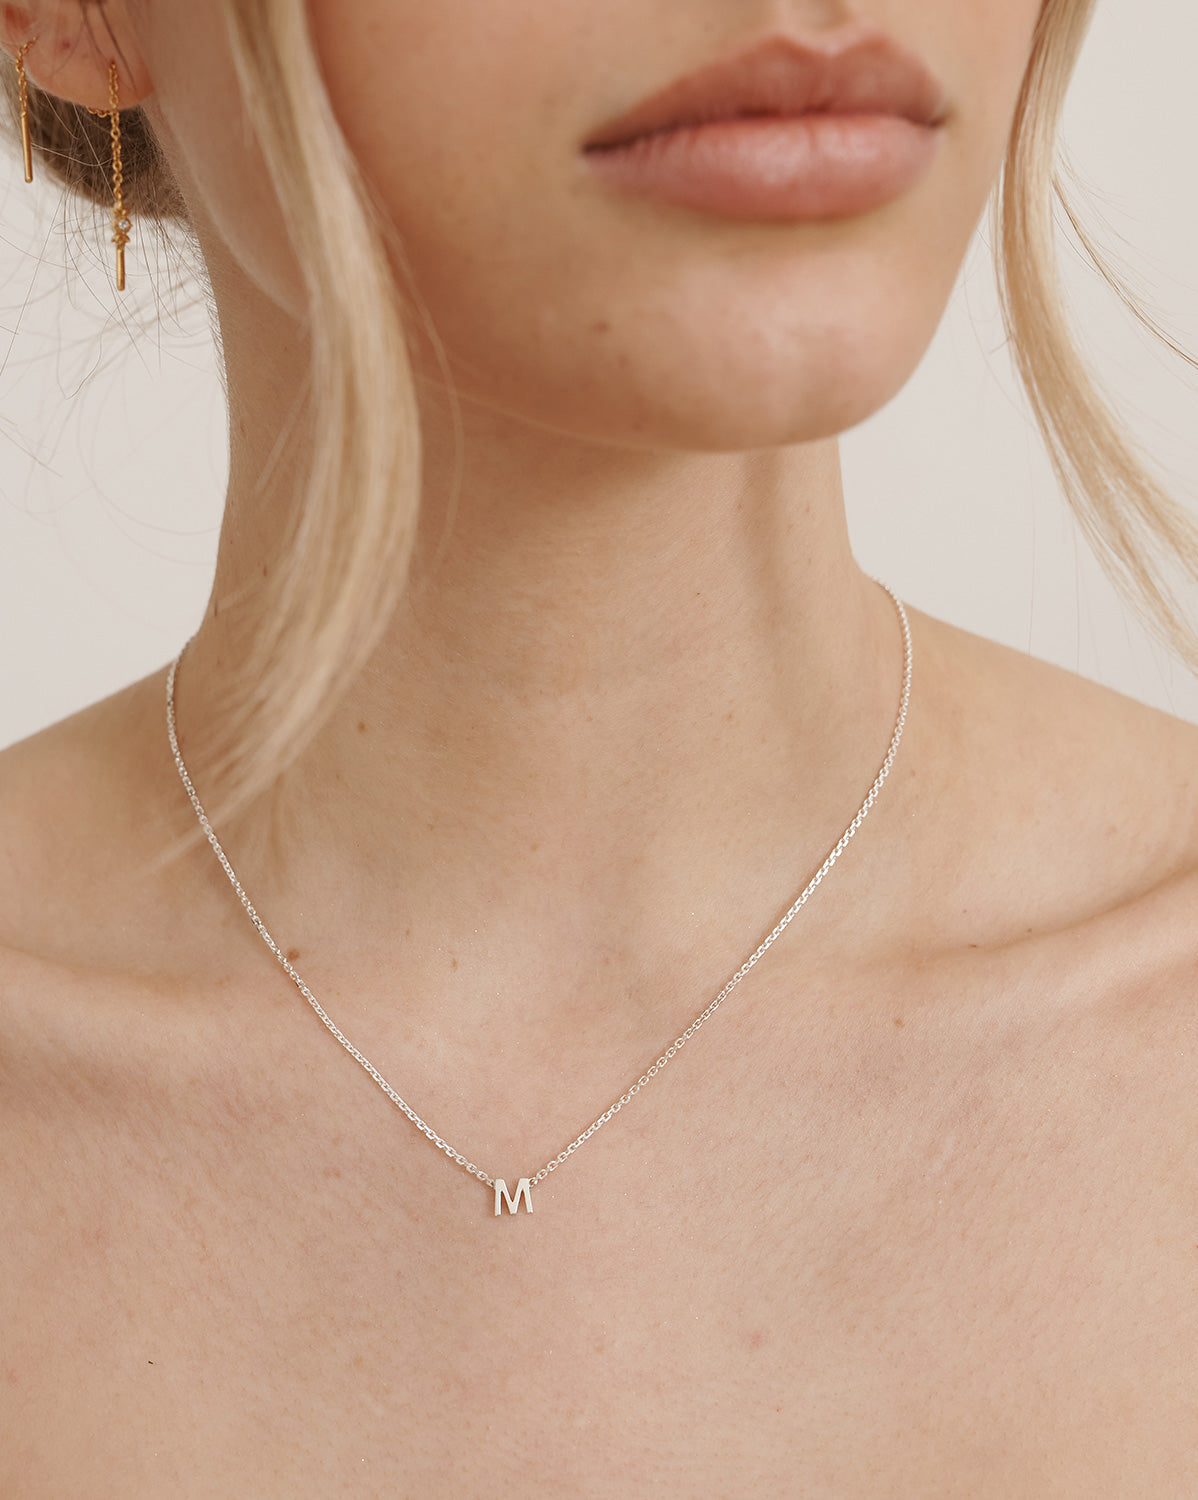 Custom Single Initial Necklace - Sterling Silver